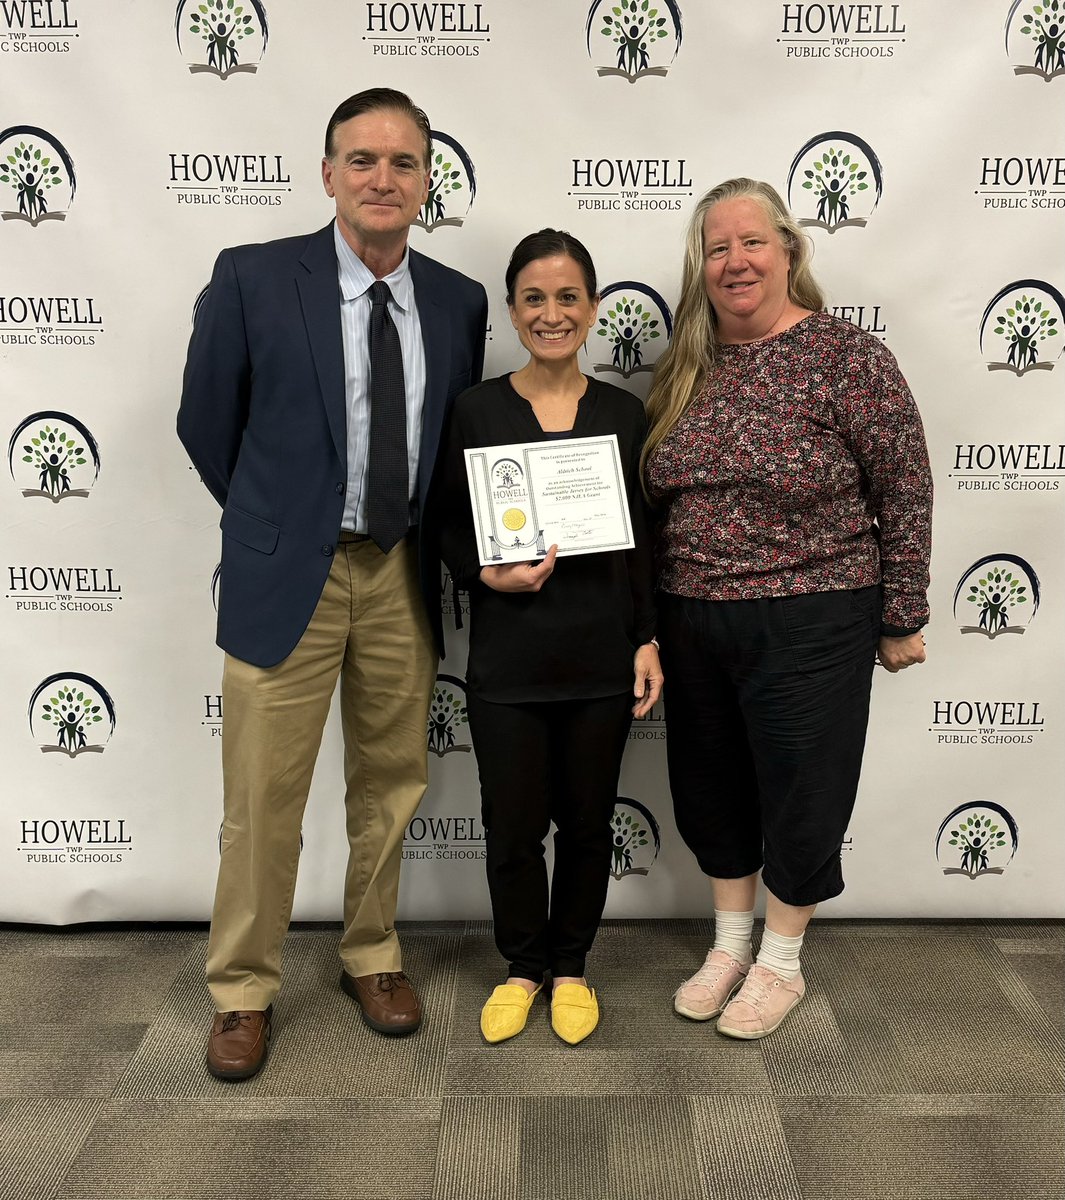 Celebrating @HowellTwpAldrch for being awarded a $2,000 grant from Sustainable NJ for Schools!  Congratulations! #HowellLeads #HTPSLearnerSuccess #HTPSTalentTeams #HTPSSustainable @SJ_Schools